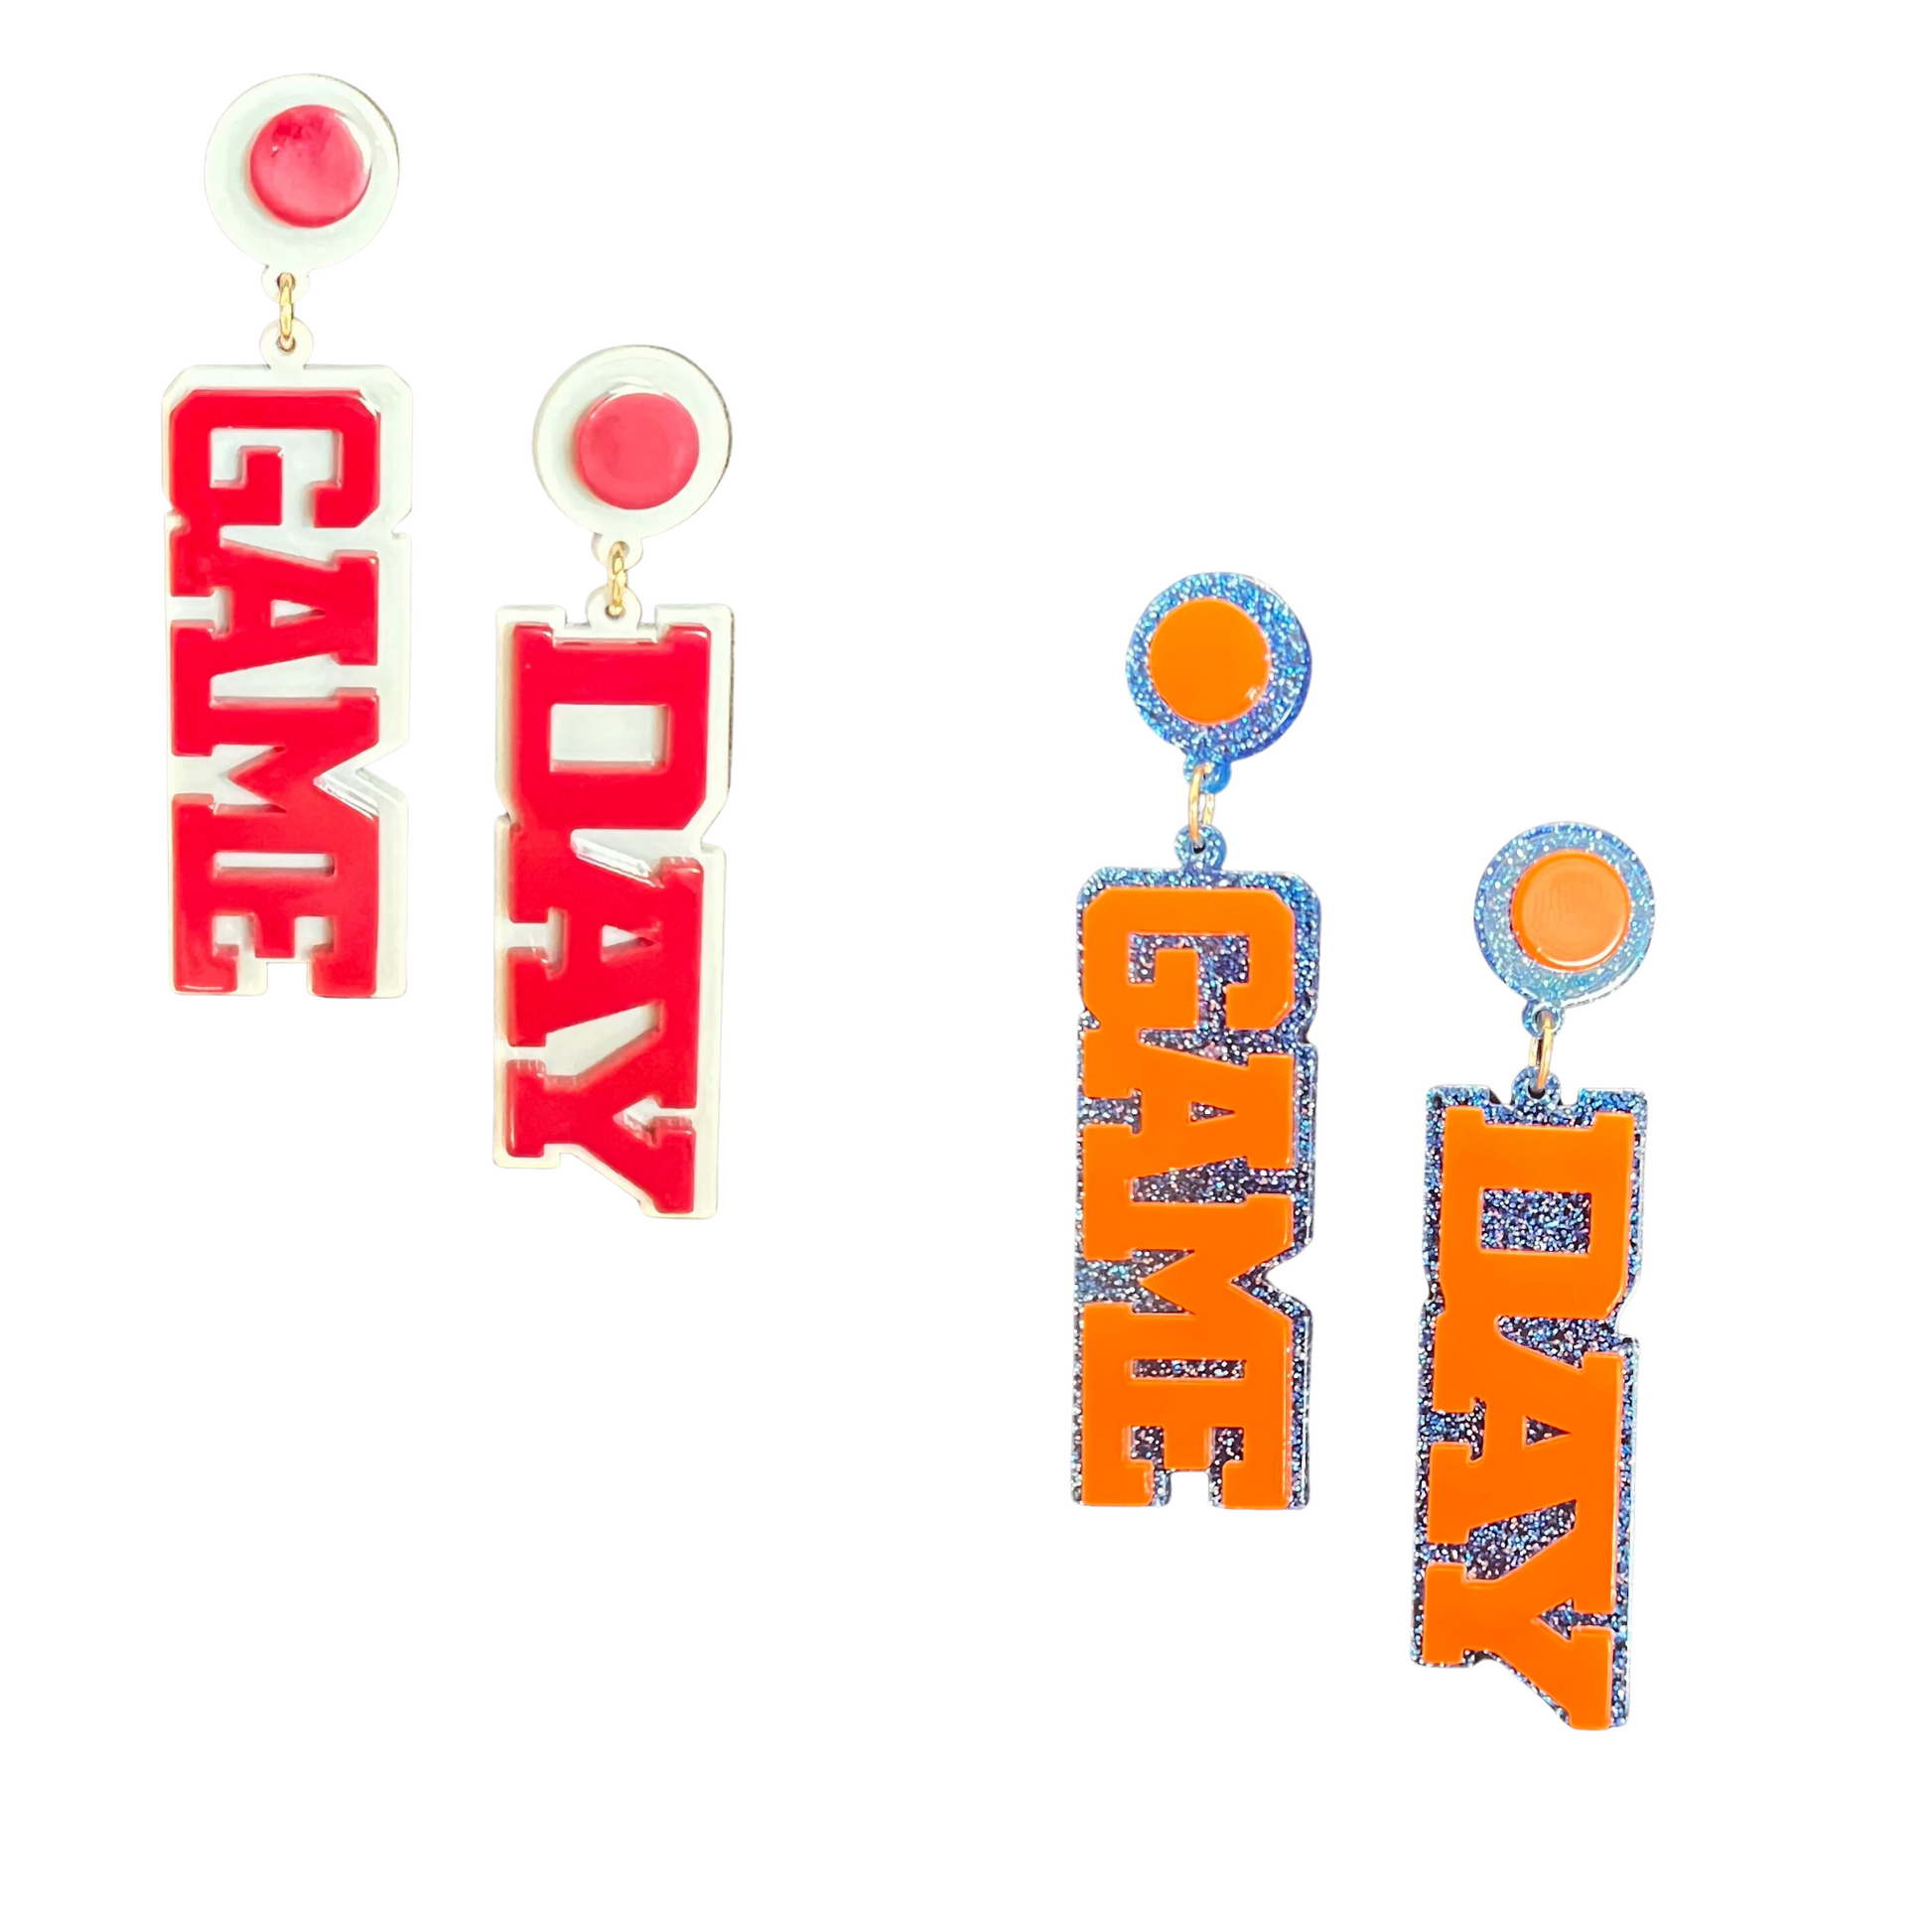 These Game Day Drop Earrings are a great way to show your team spirit! They boast a vivid orange and blue design, as well as a more subtle red and grey combination. Let everyone know your pride for the game with these stylish dangle earrings.